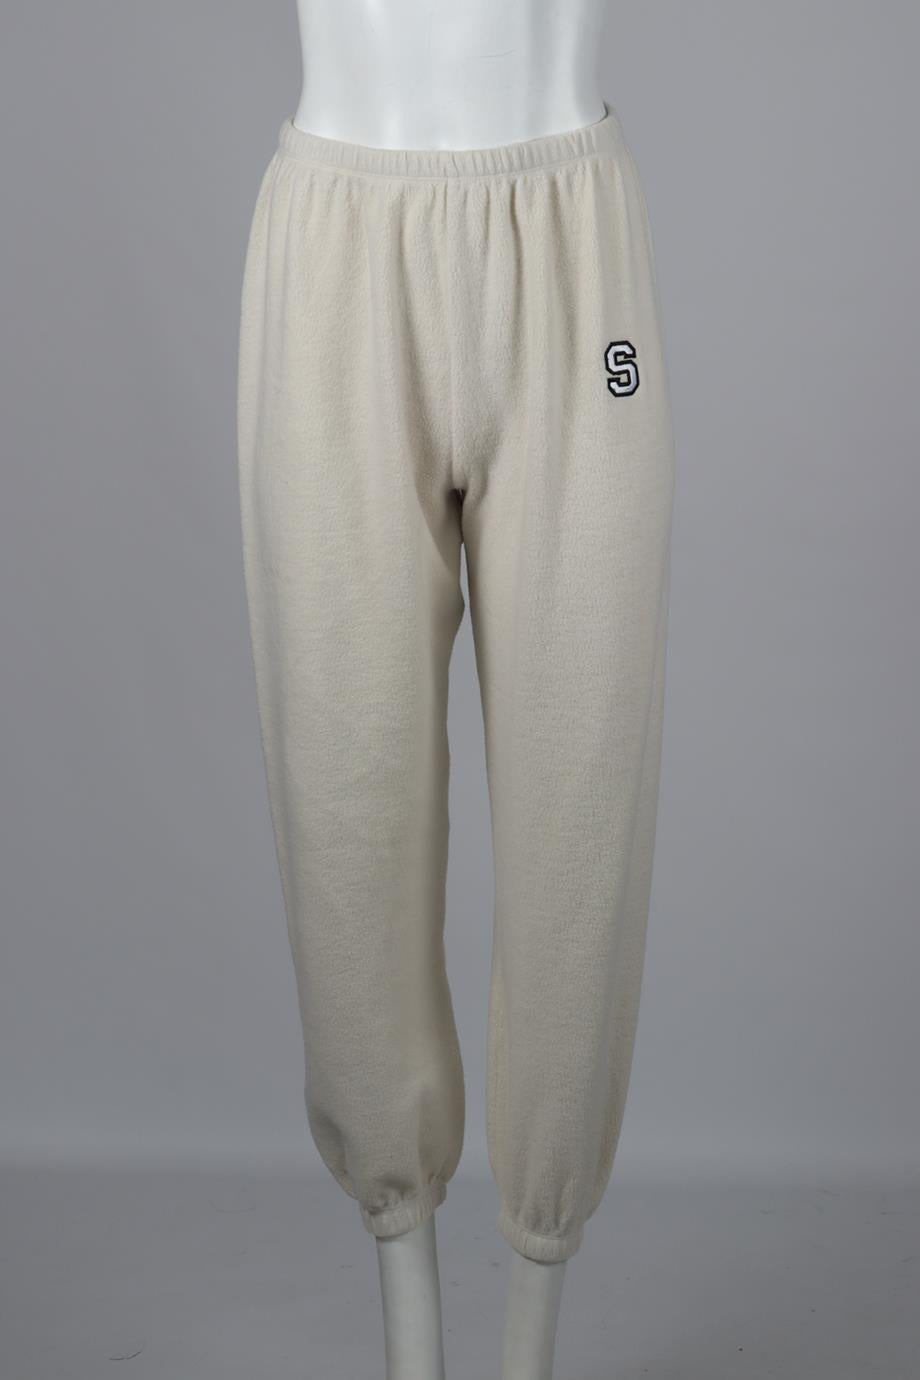 SPRWMN EMBROIDERED FLEECE TRACK PANTS SMALL